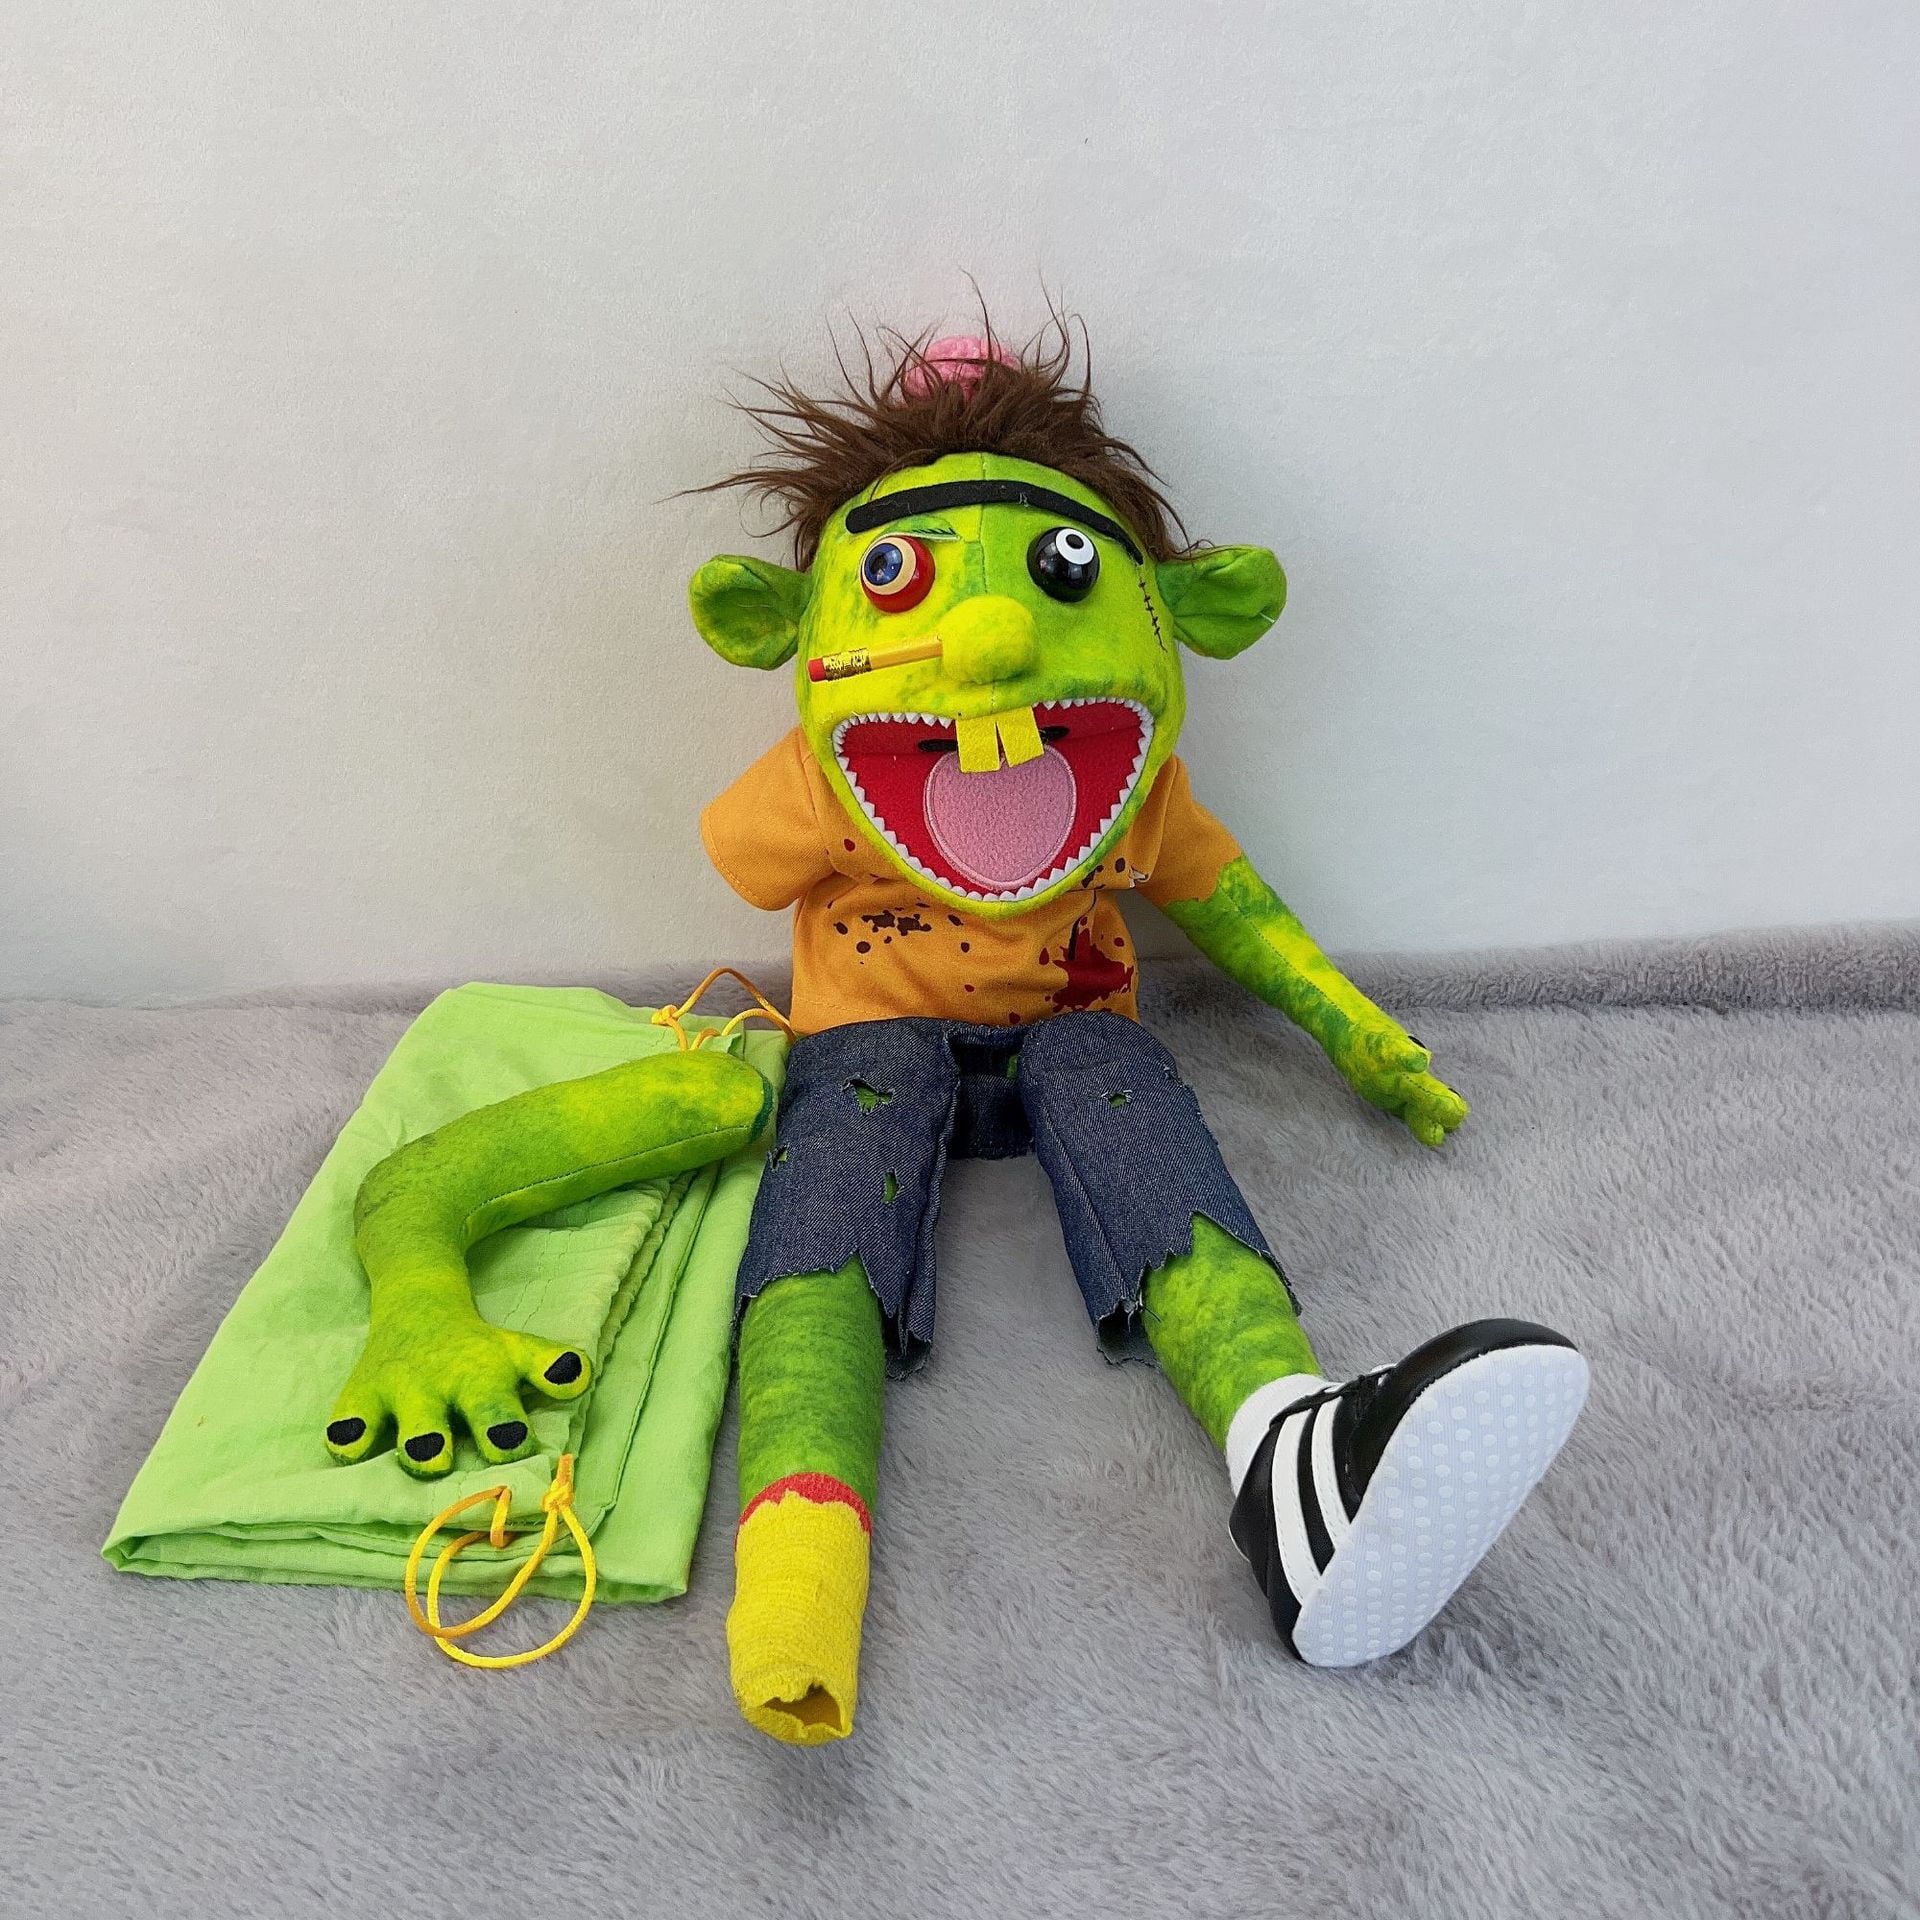 Jeffy Puppet Plush Toy Doll, Jeffy Puppets Sml Toy, Mischievous Funny  Puppets Toy With Working Mouth